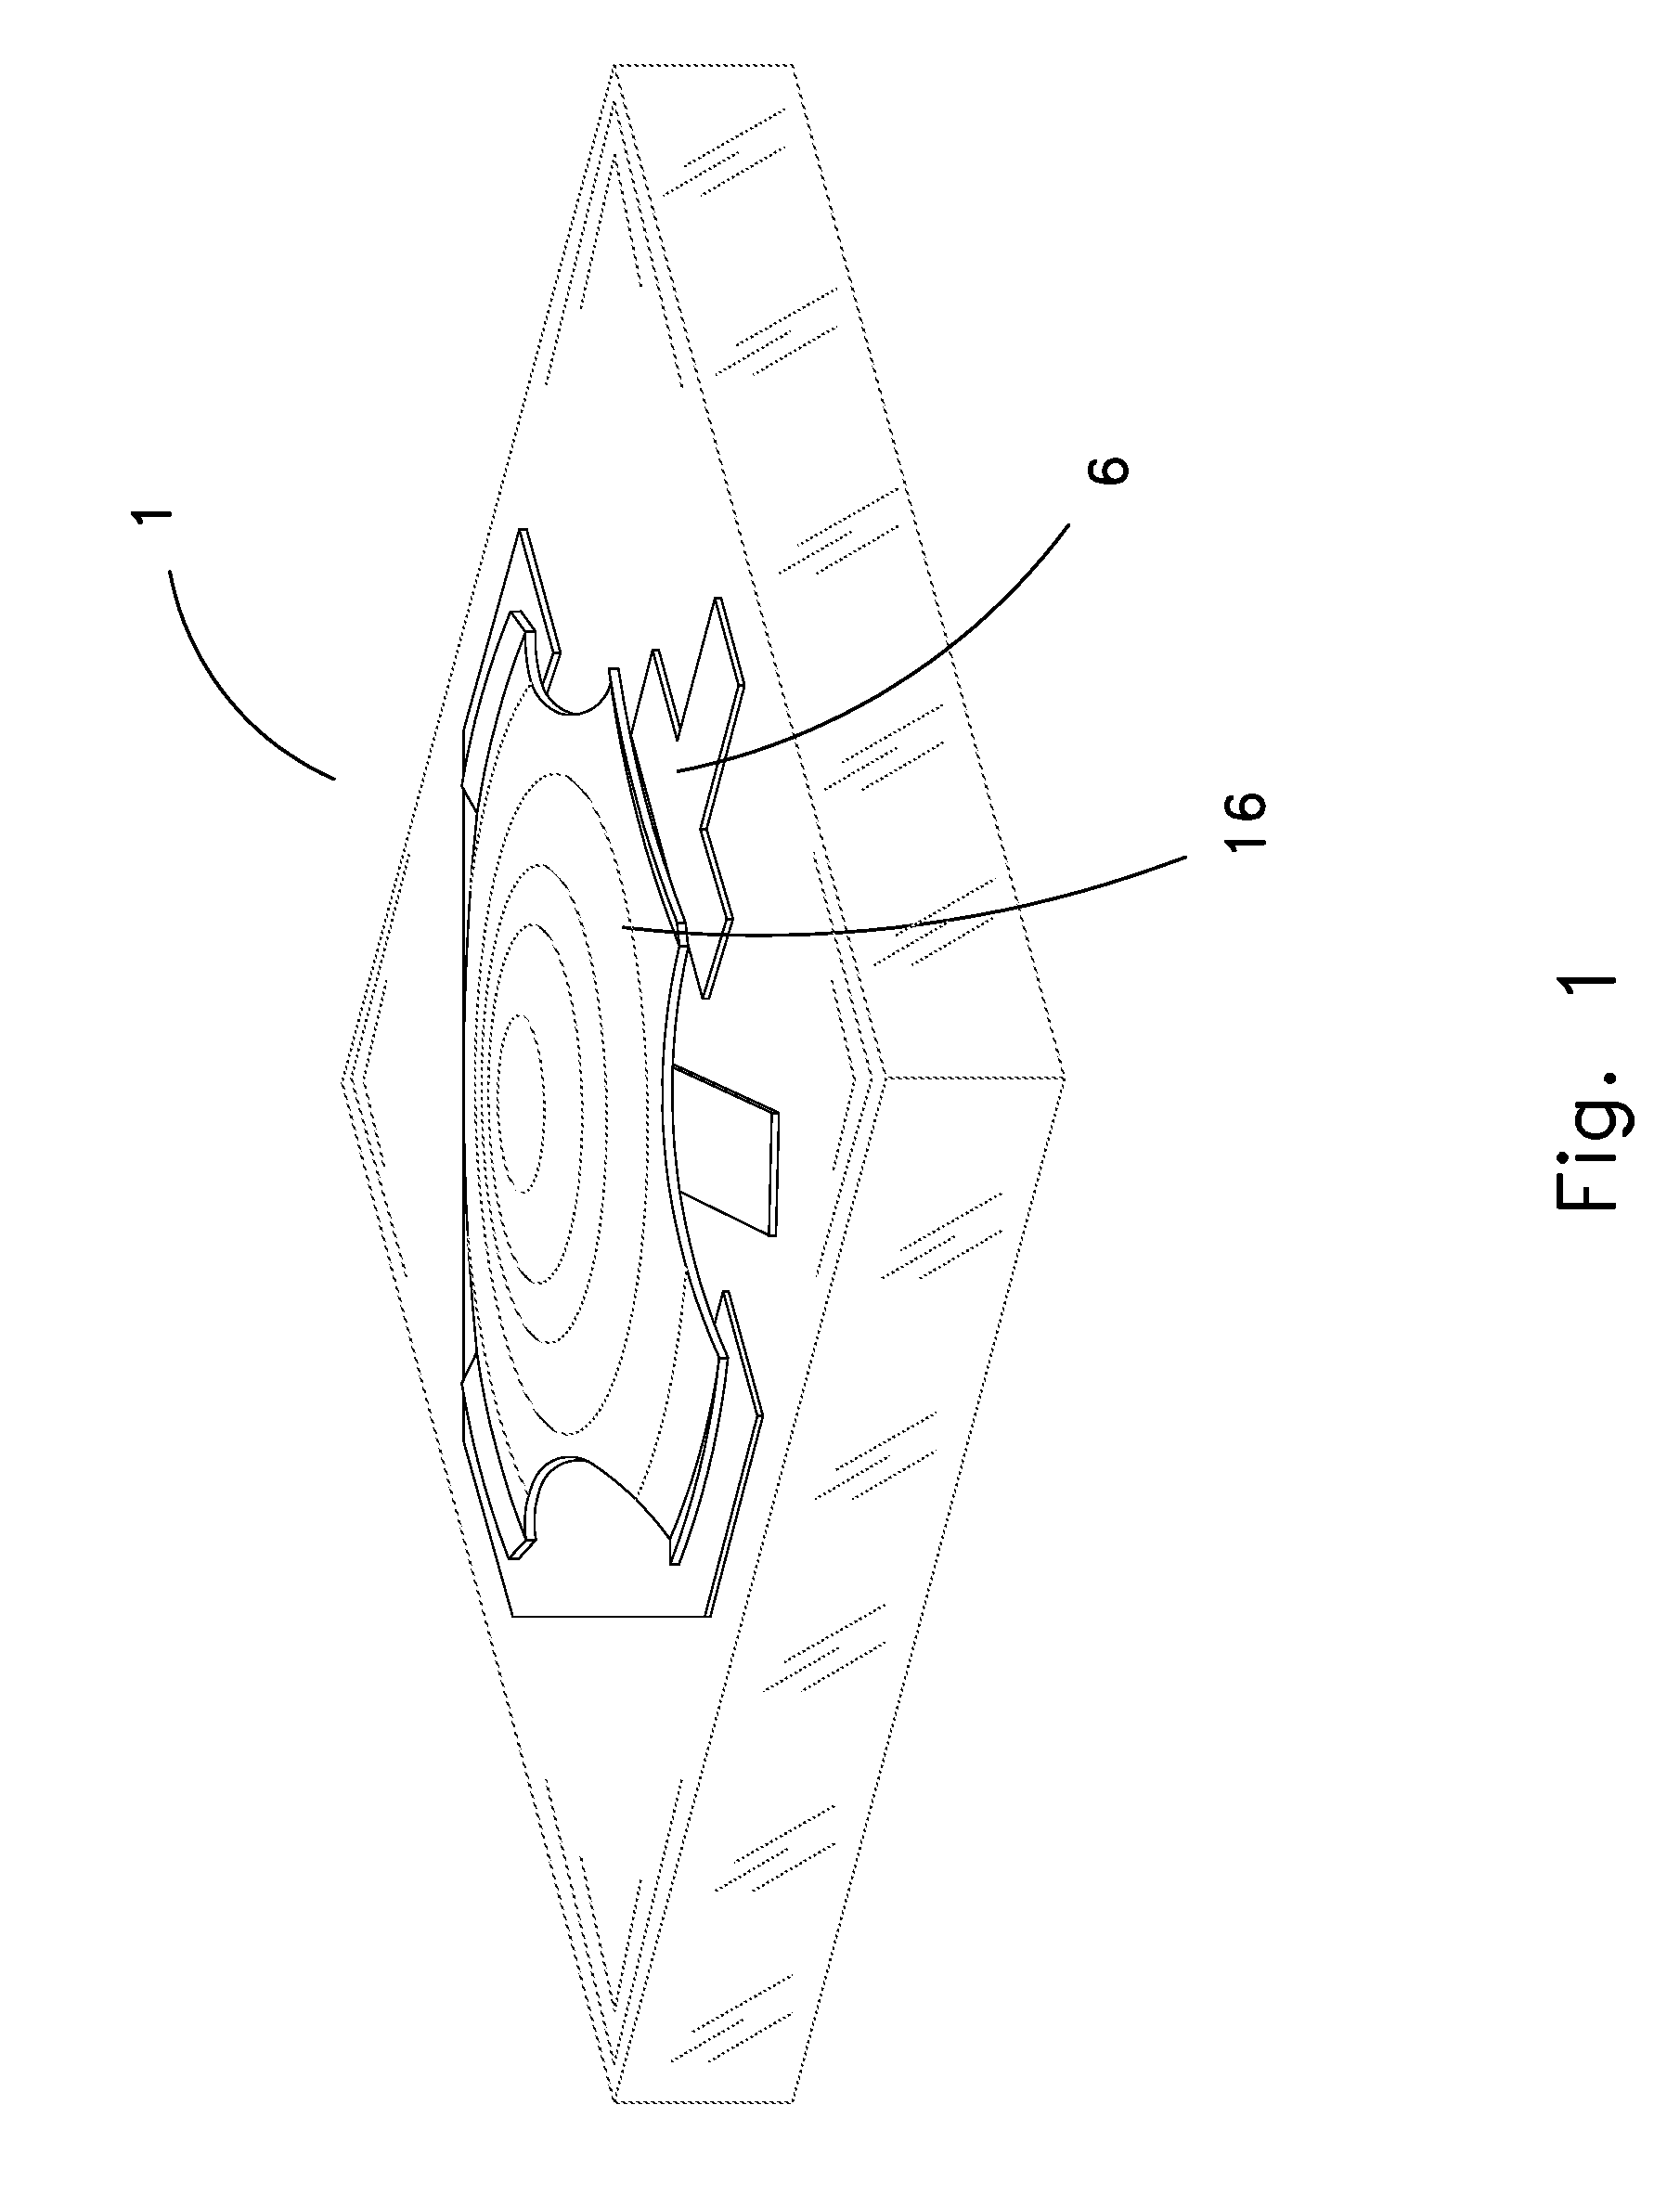 Electrical switch apparatus and methods